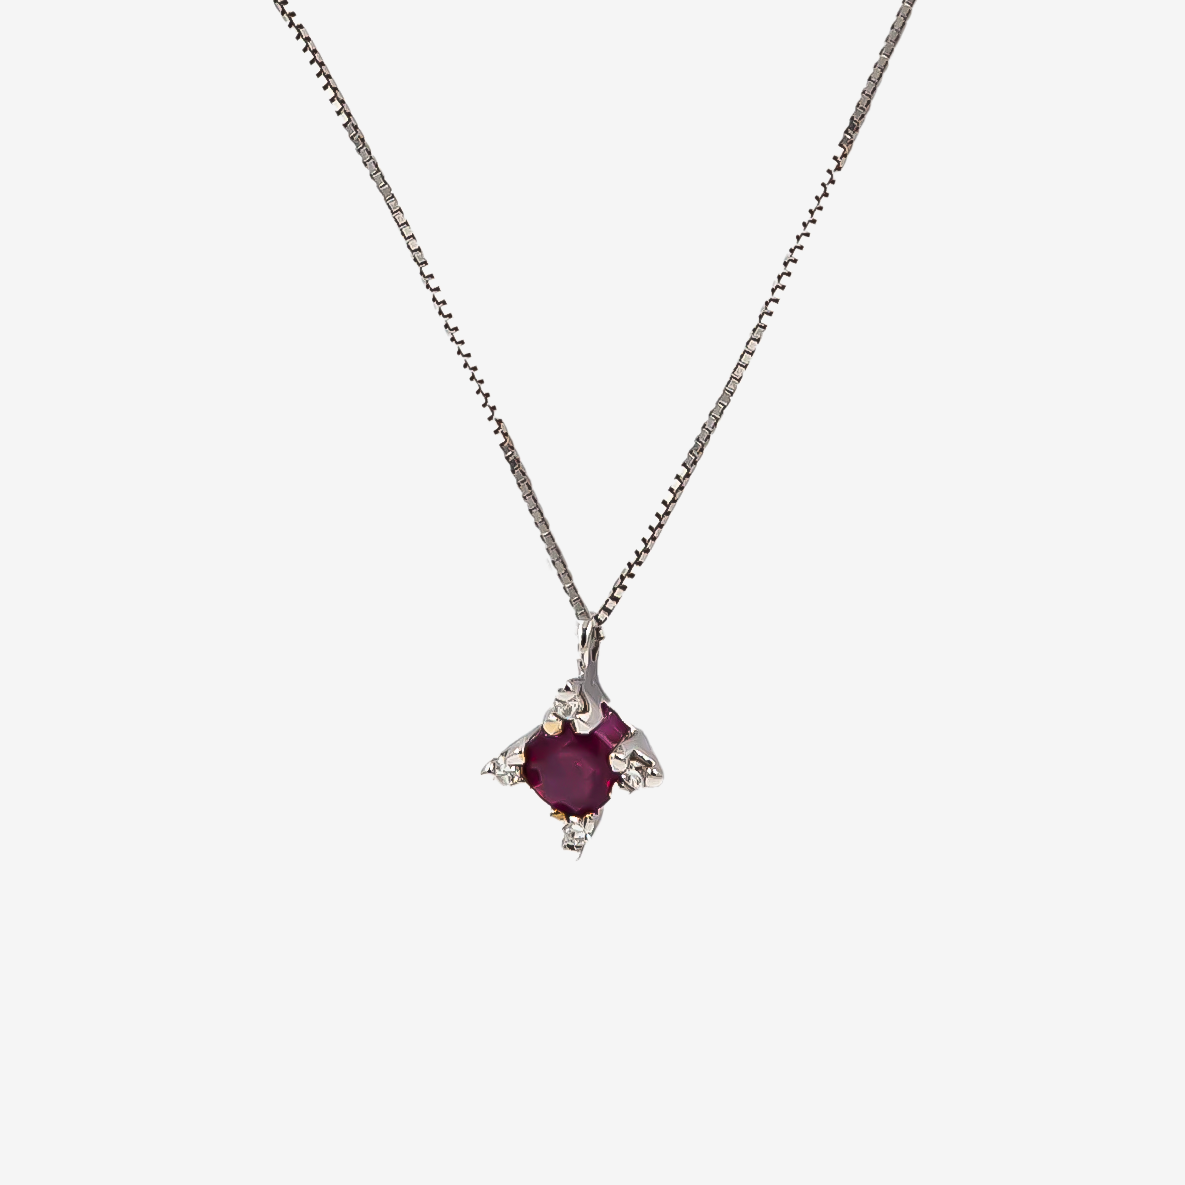 Star necklace with ruby